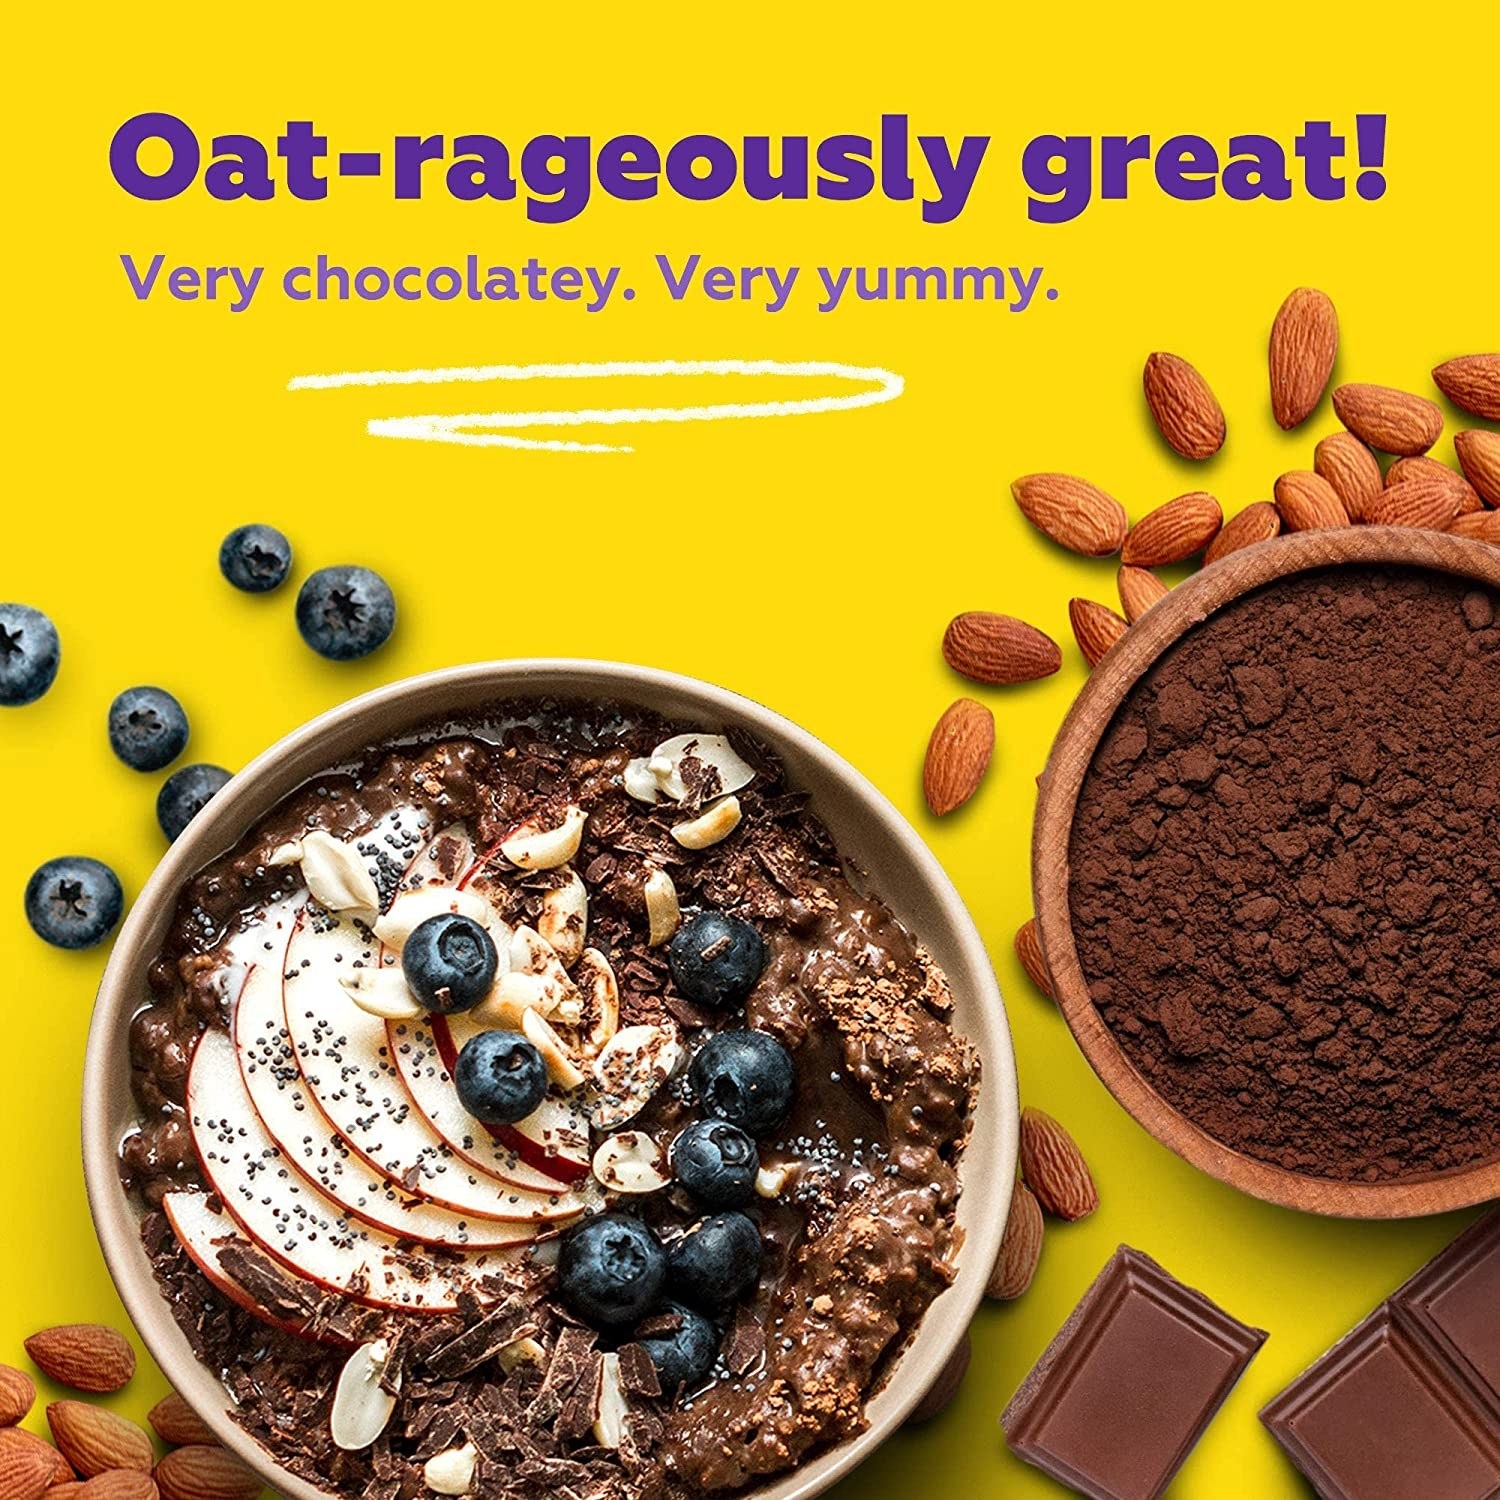 A bowl with chocolate oats in it next to cocoa in a bowl